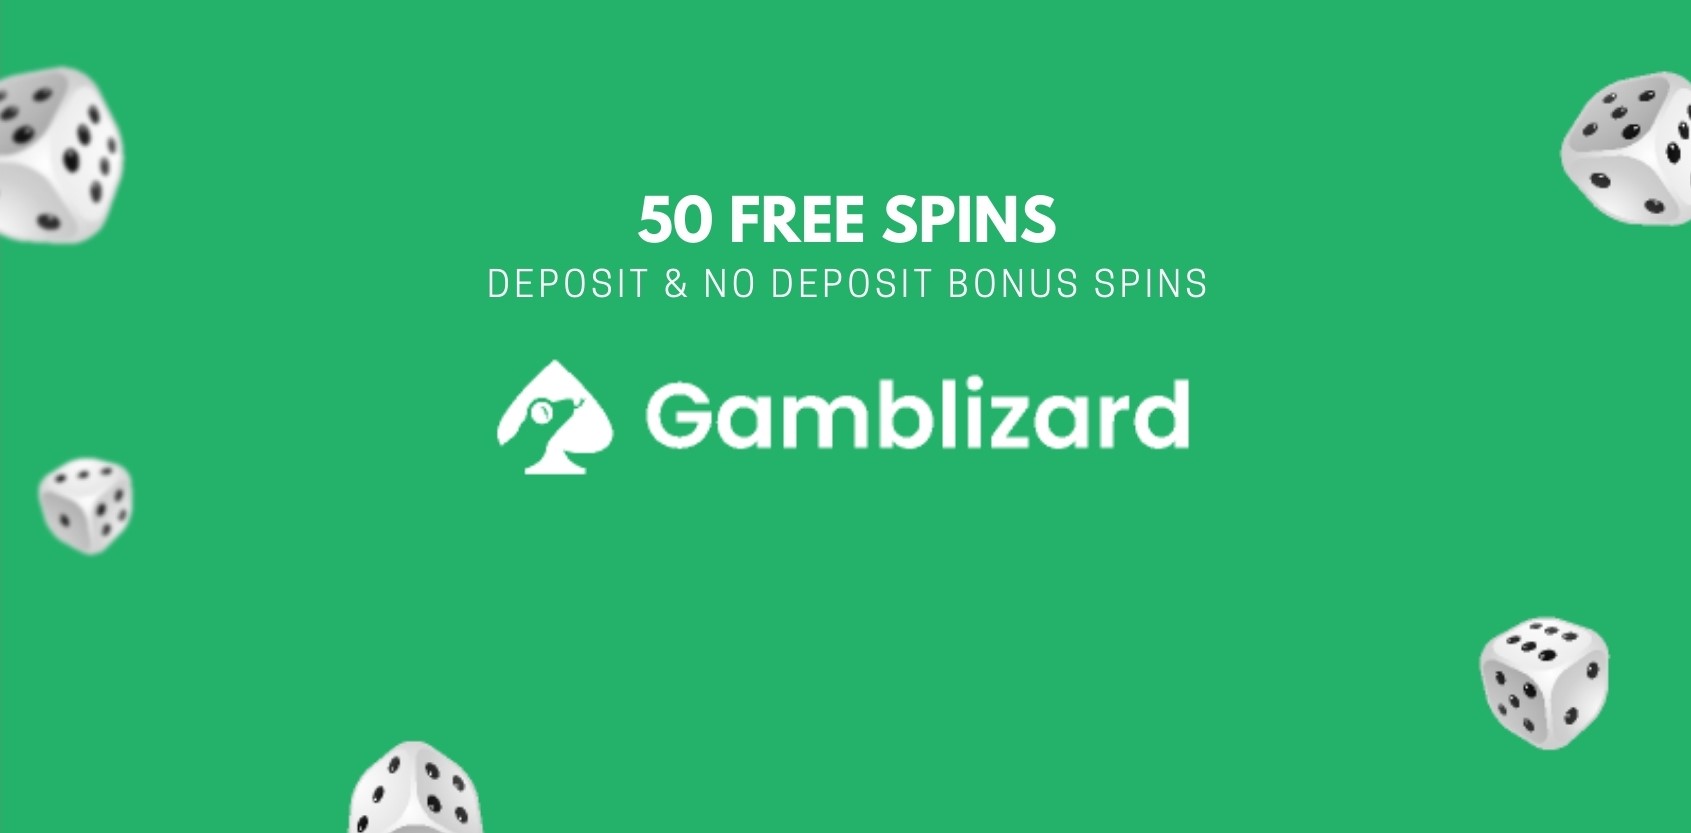 50 Free Spins No Deposit when you add your bank card